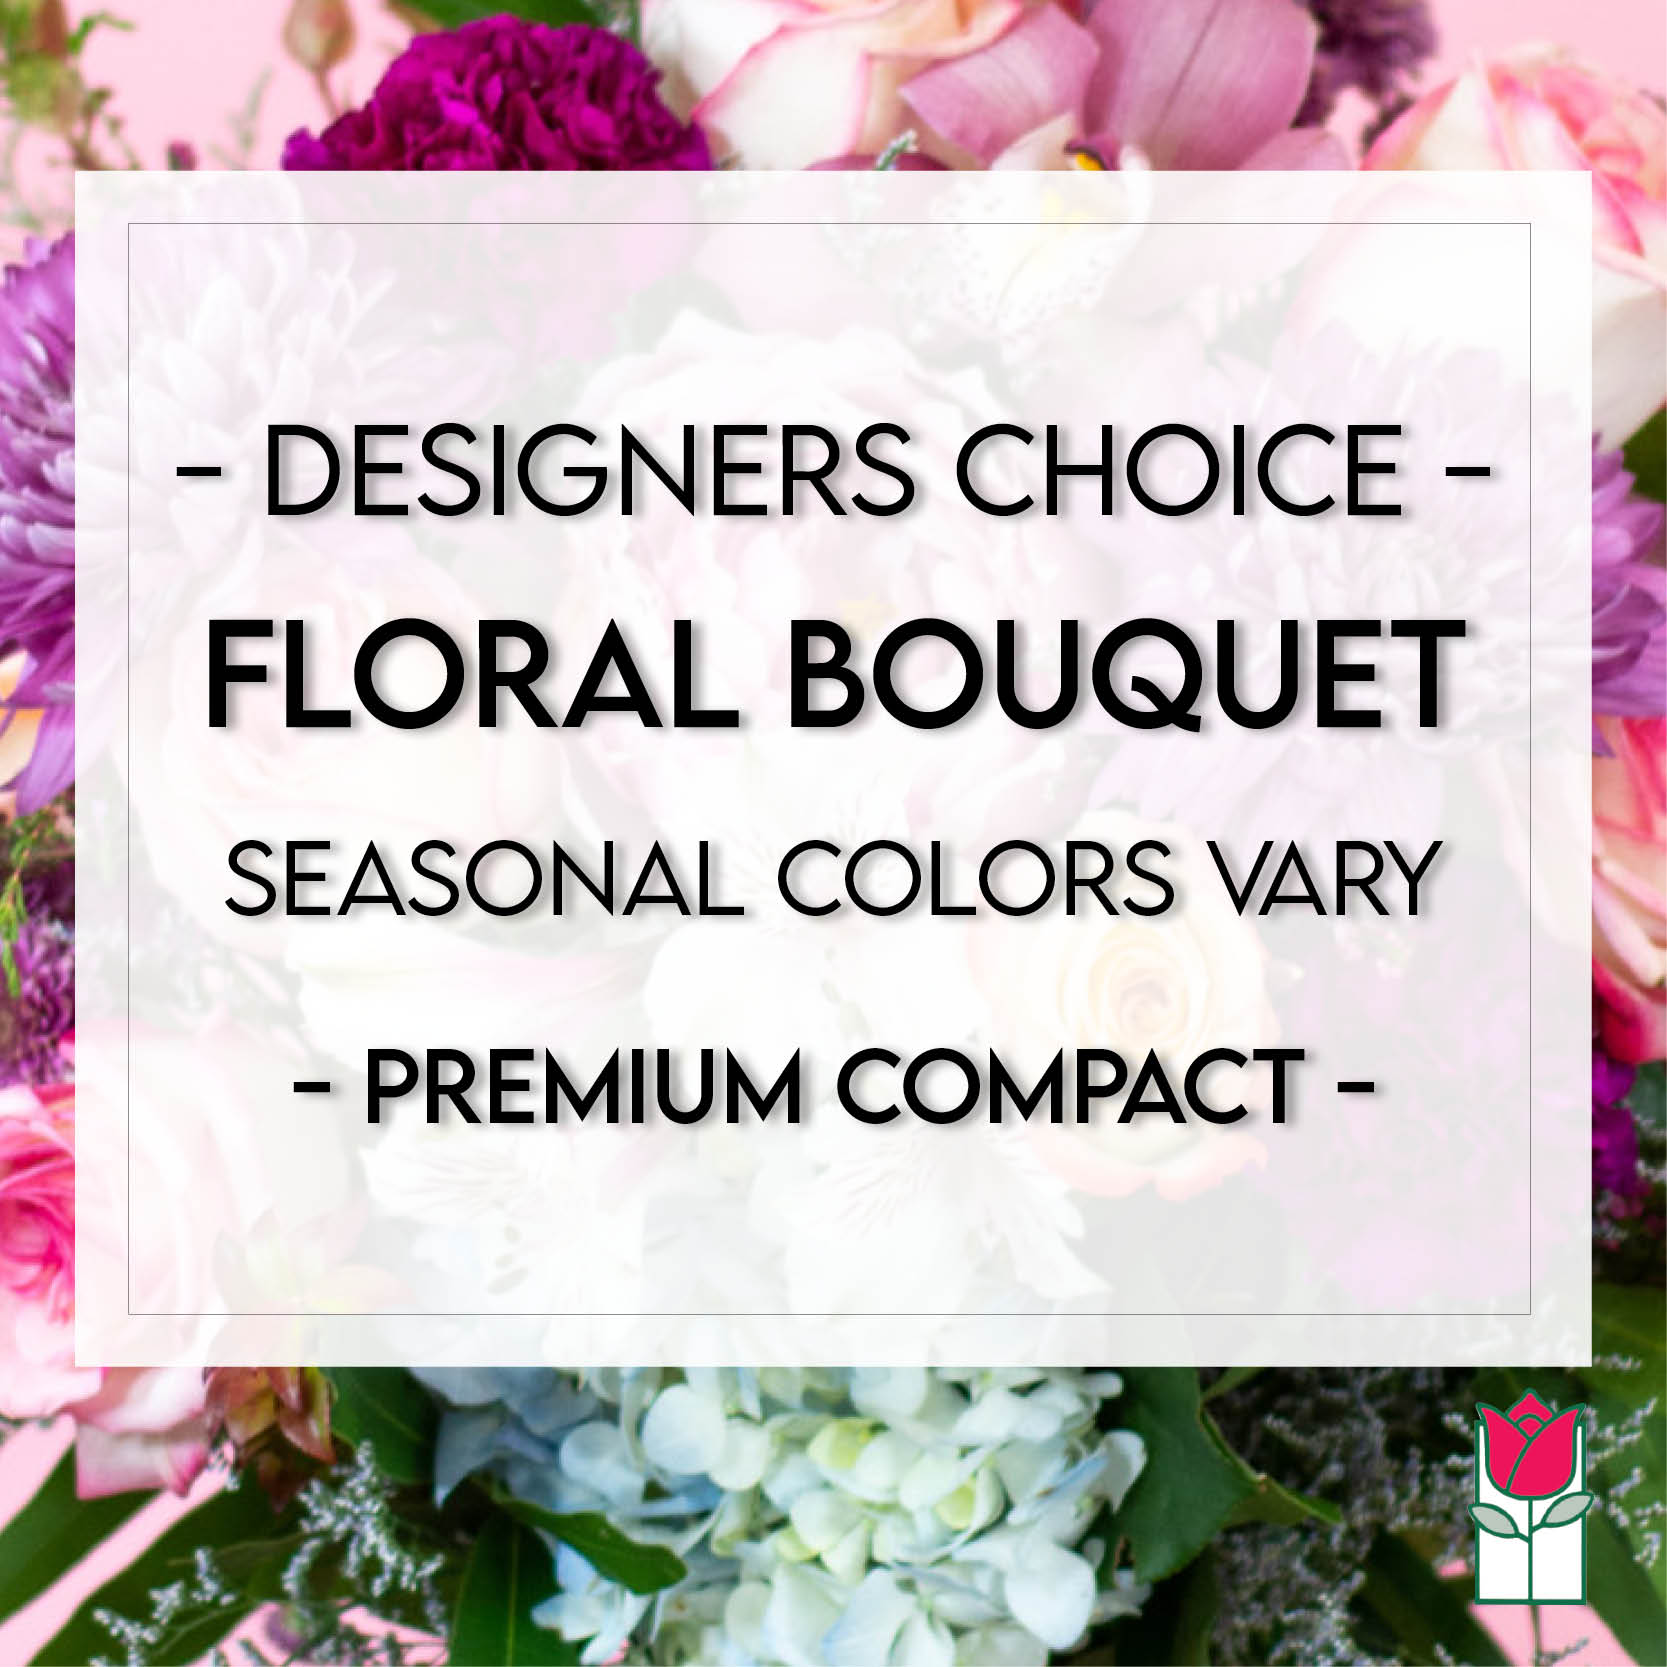 Seasonal Designers Choice Bouquet - Premium Compact - Can't decide?  Let the designers at Beretania Florist make a custom bouquet especially for you. We'll craft a beautiful arrangement with seasonal flowers in a tasteful color palette. 